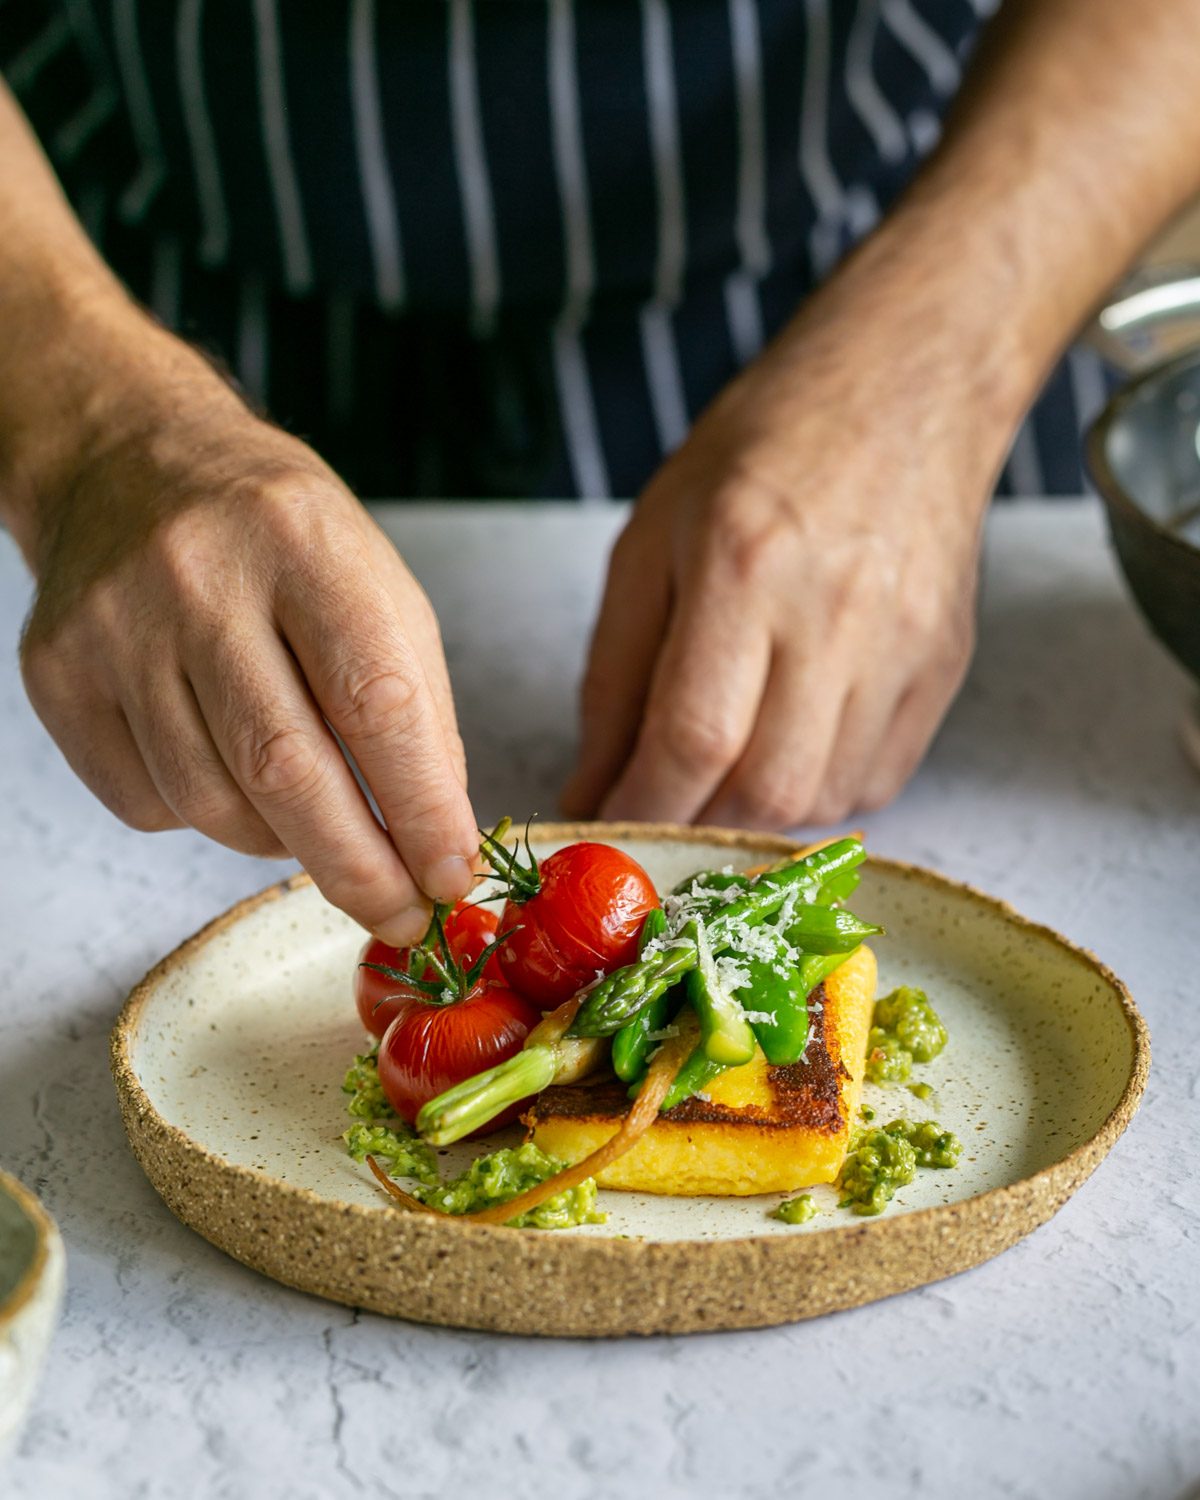 Plating up the polenta with vegetables on a plate